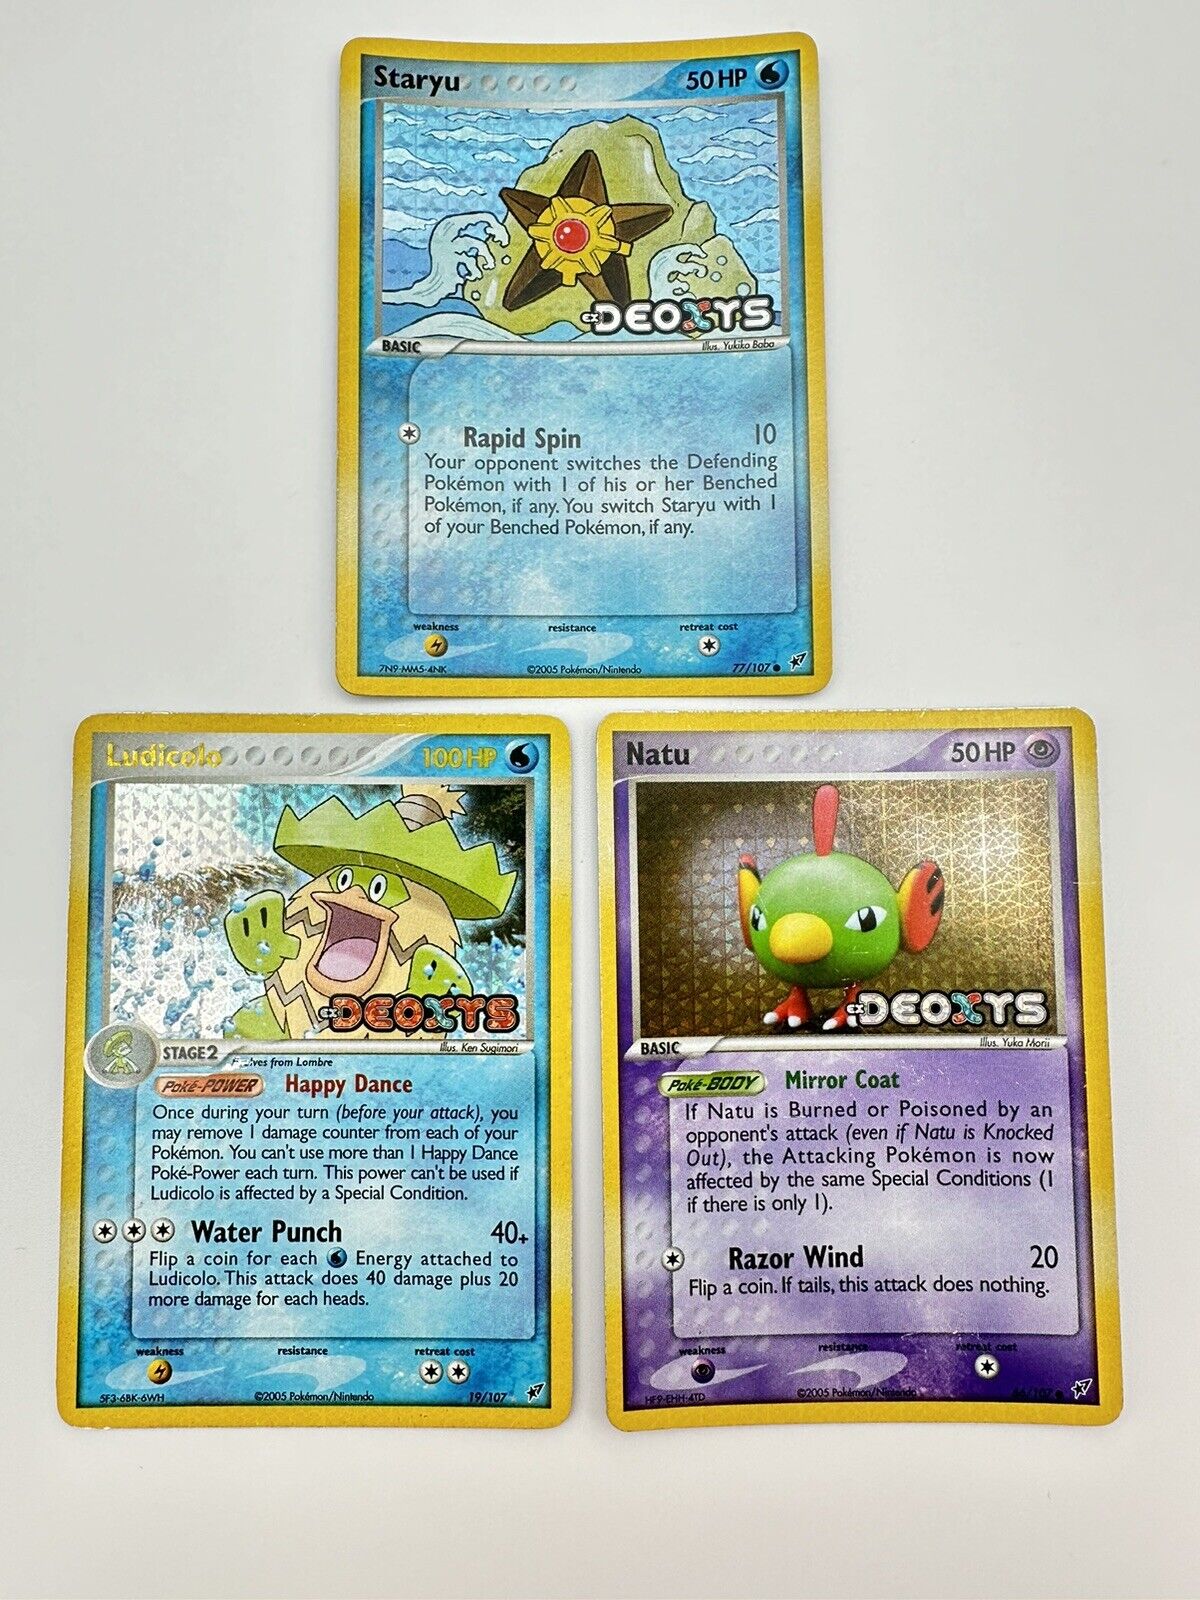 2005 Pokemon EX Deoxys Holo Reverse Stamped Lot Of x3 Cards MP